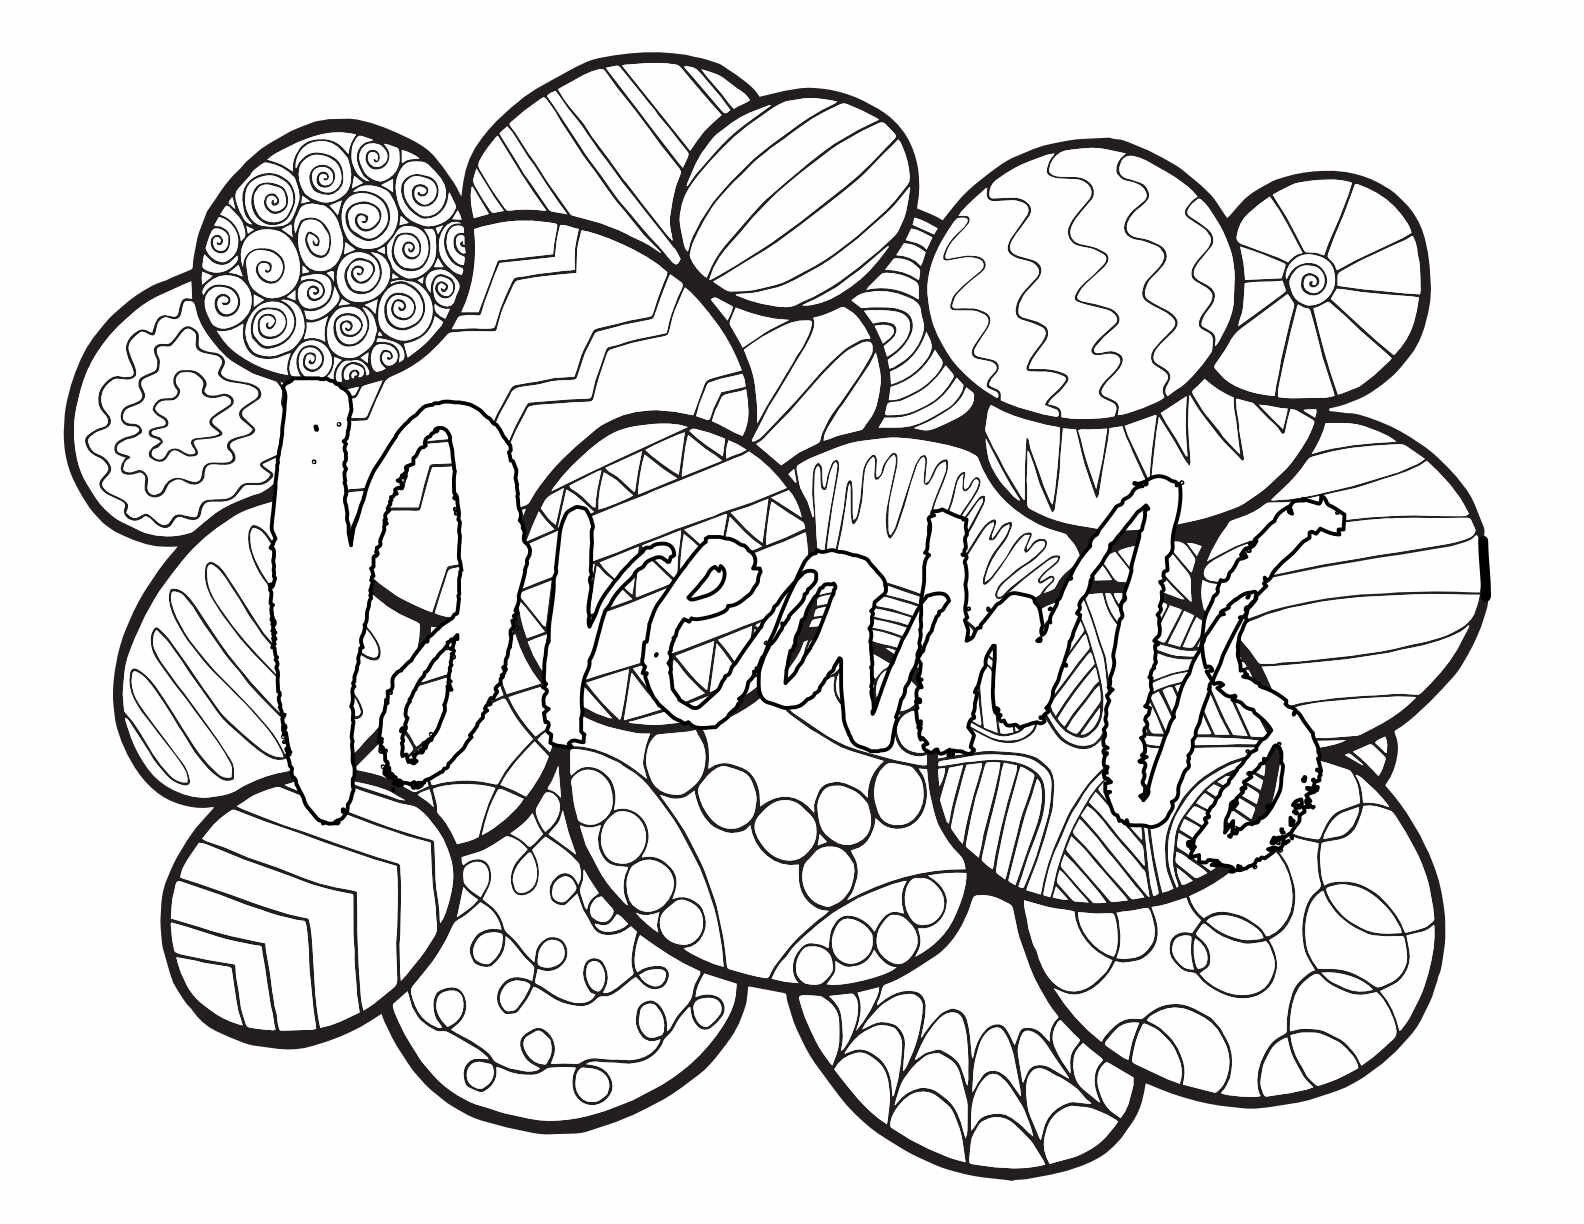 3 FREE DREAMS PRINTABLE COLORING PAGES CLICK HERE TO DOWNLOAD THE PAGE ABOVE